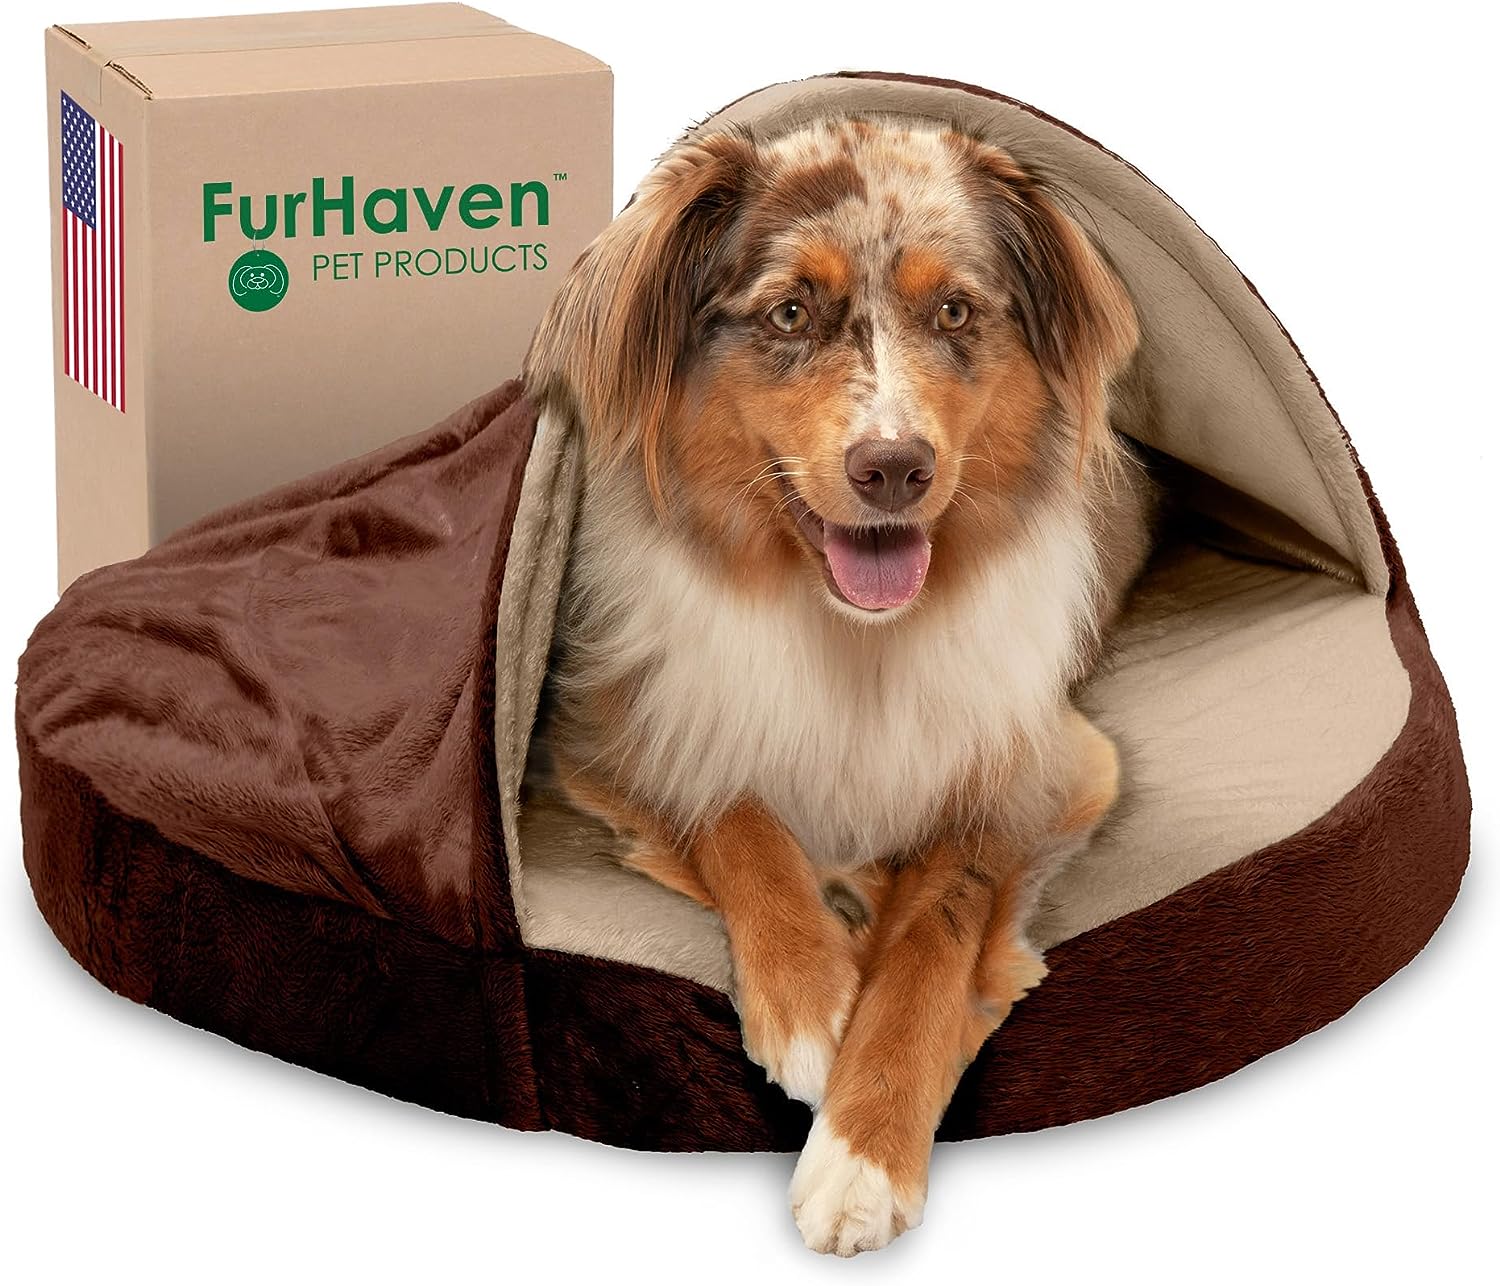 Furhaven Covered Round Orthopedic Dog Bed